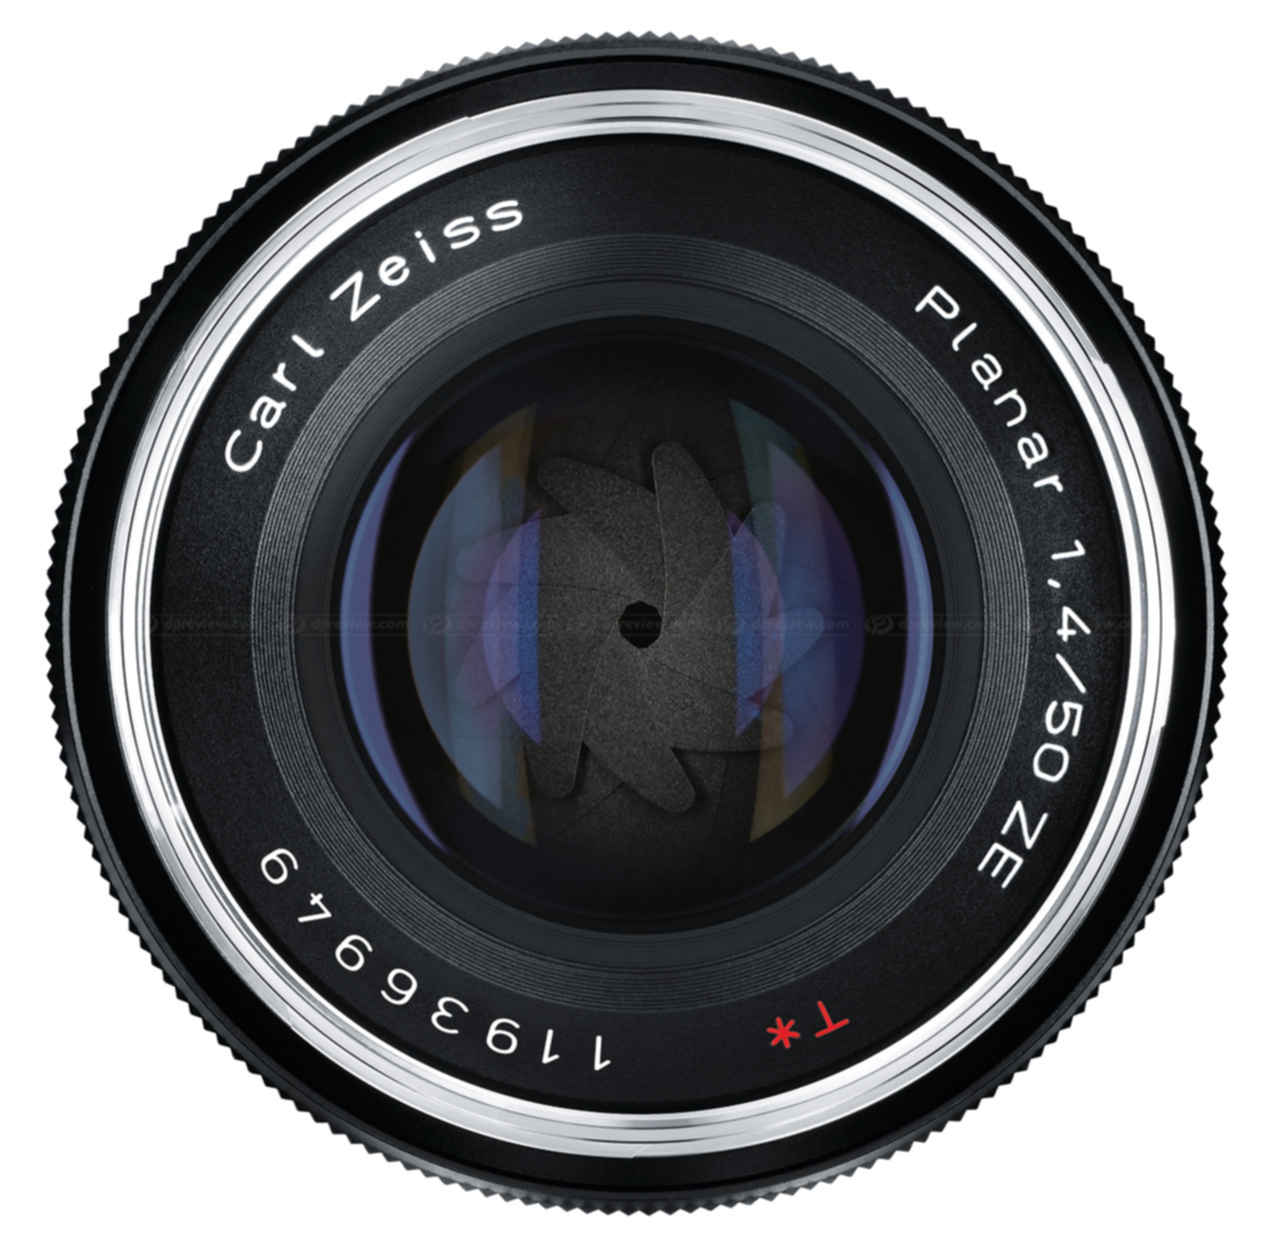 Carl Zeiss 50mm f/1.4 Canon